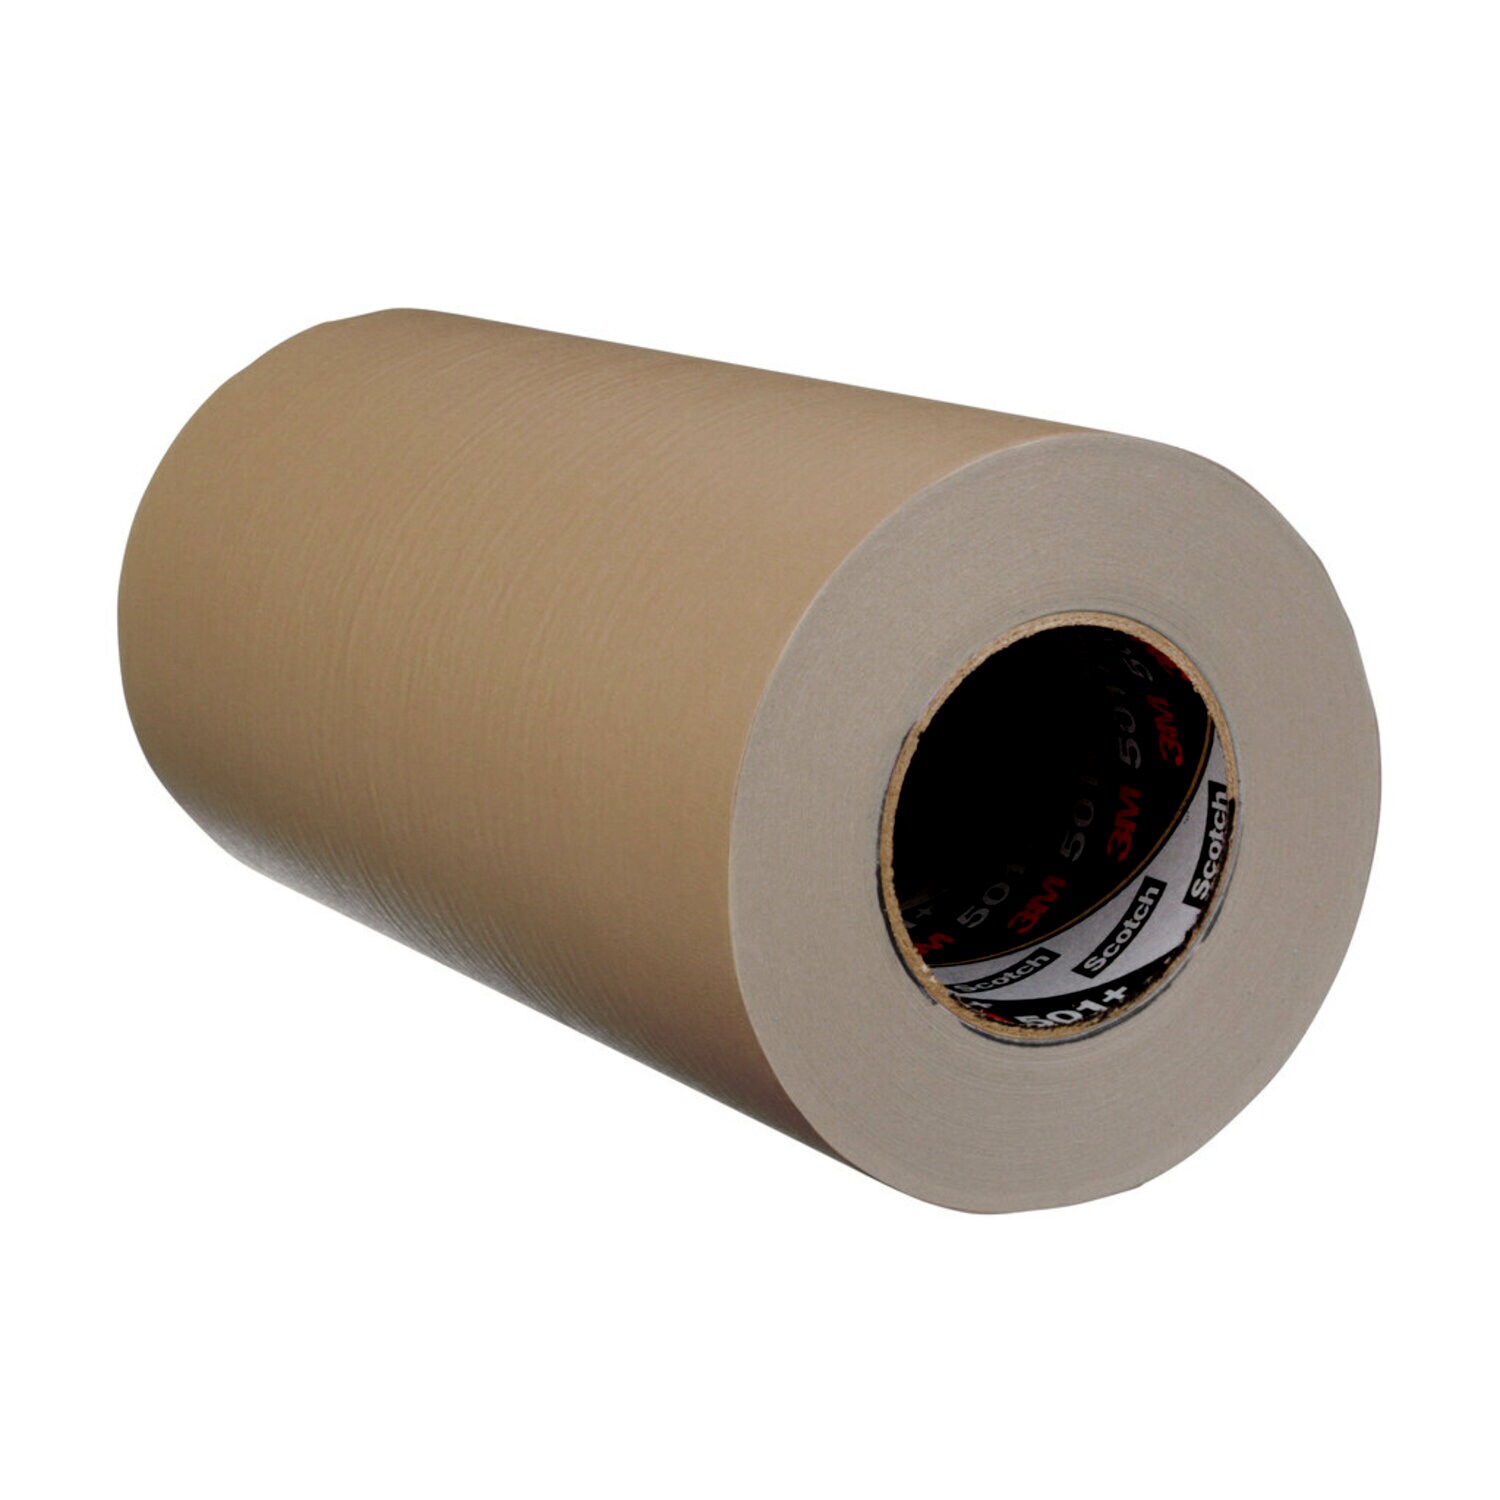 7010312110 - 3M Specialty High Temperature Masking Tape 501+, Tan, 12 in x 60 yd,
7.3 mil, 4 Rolls/Case